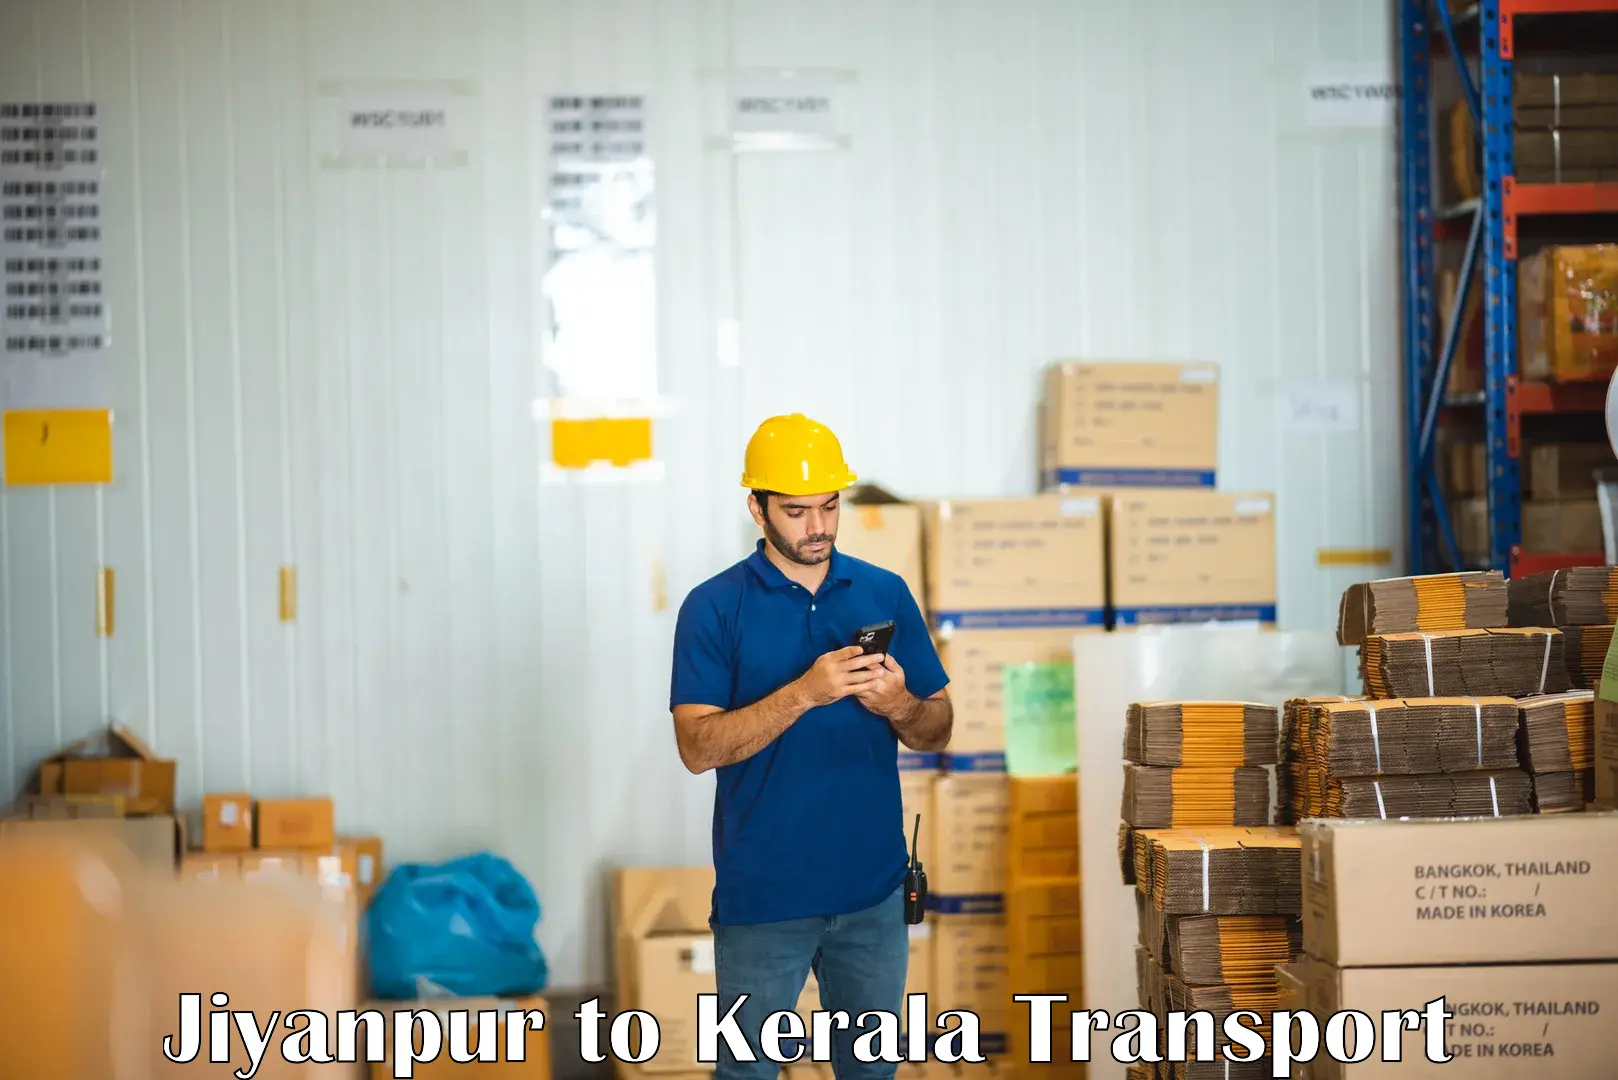 Vehicle transport services Jiyanpur to Kollam